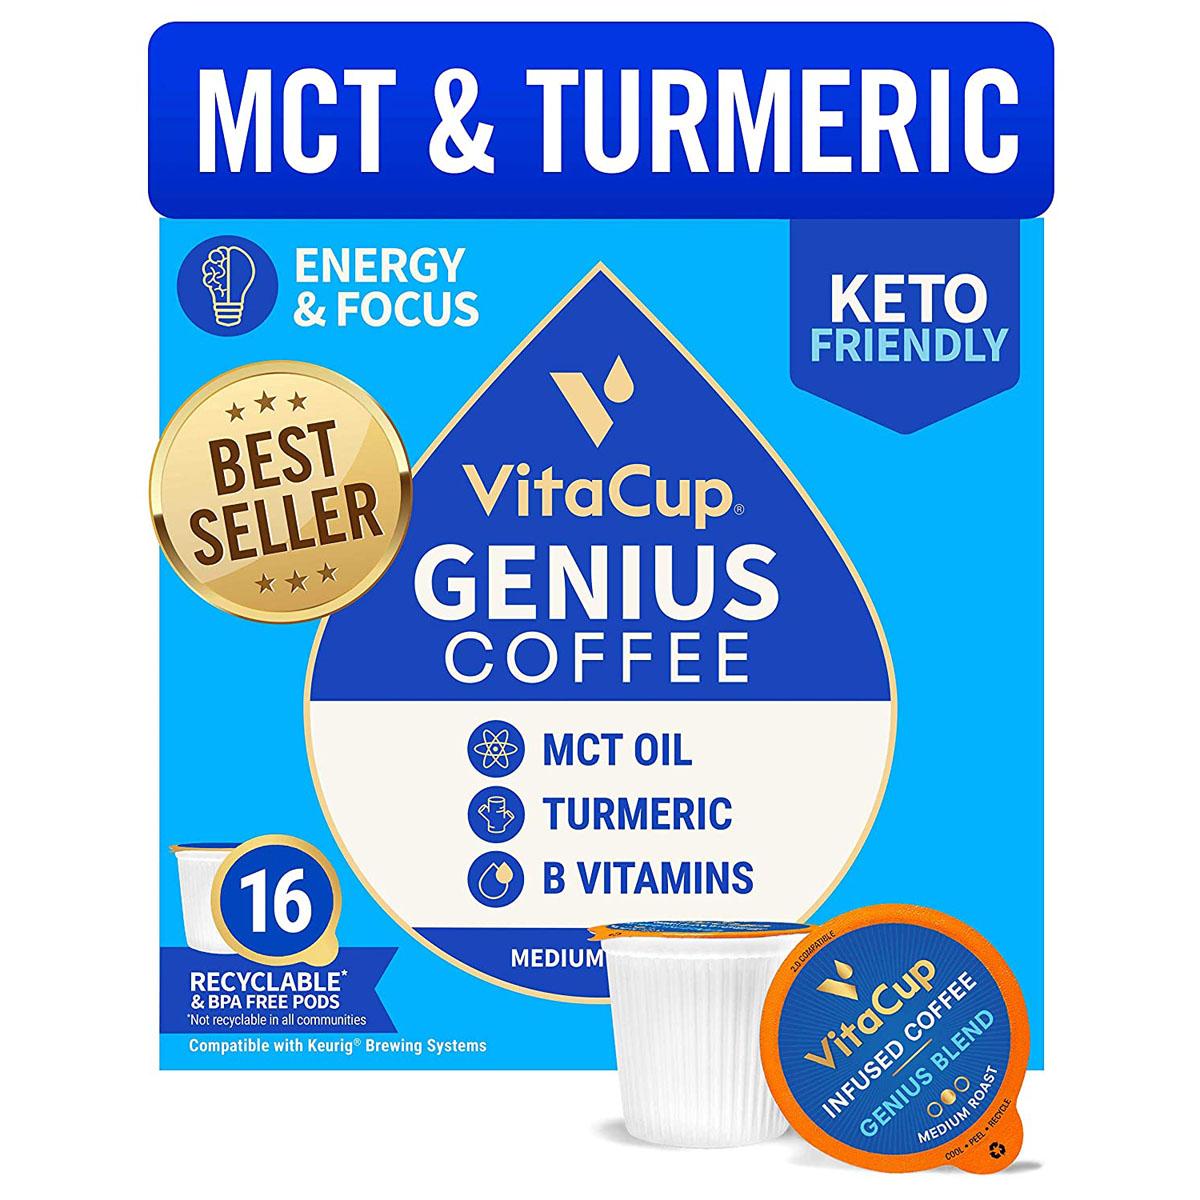 16 Vitacup Genius Keto Coffee Keuring K-Cup Pods for $11.50 Shipped